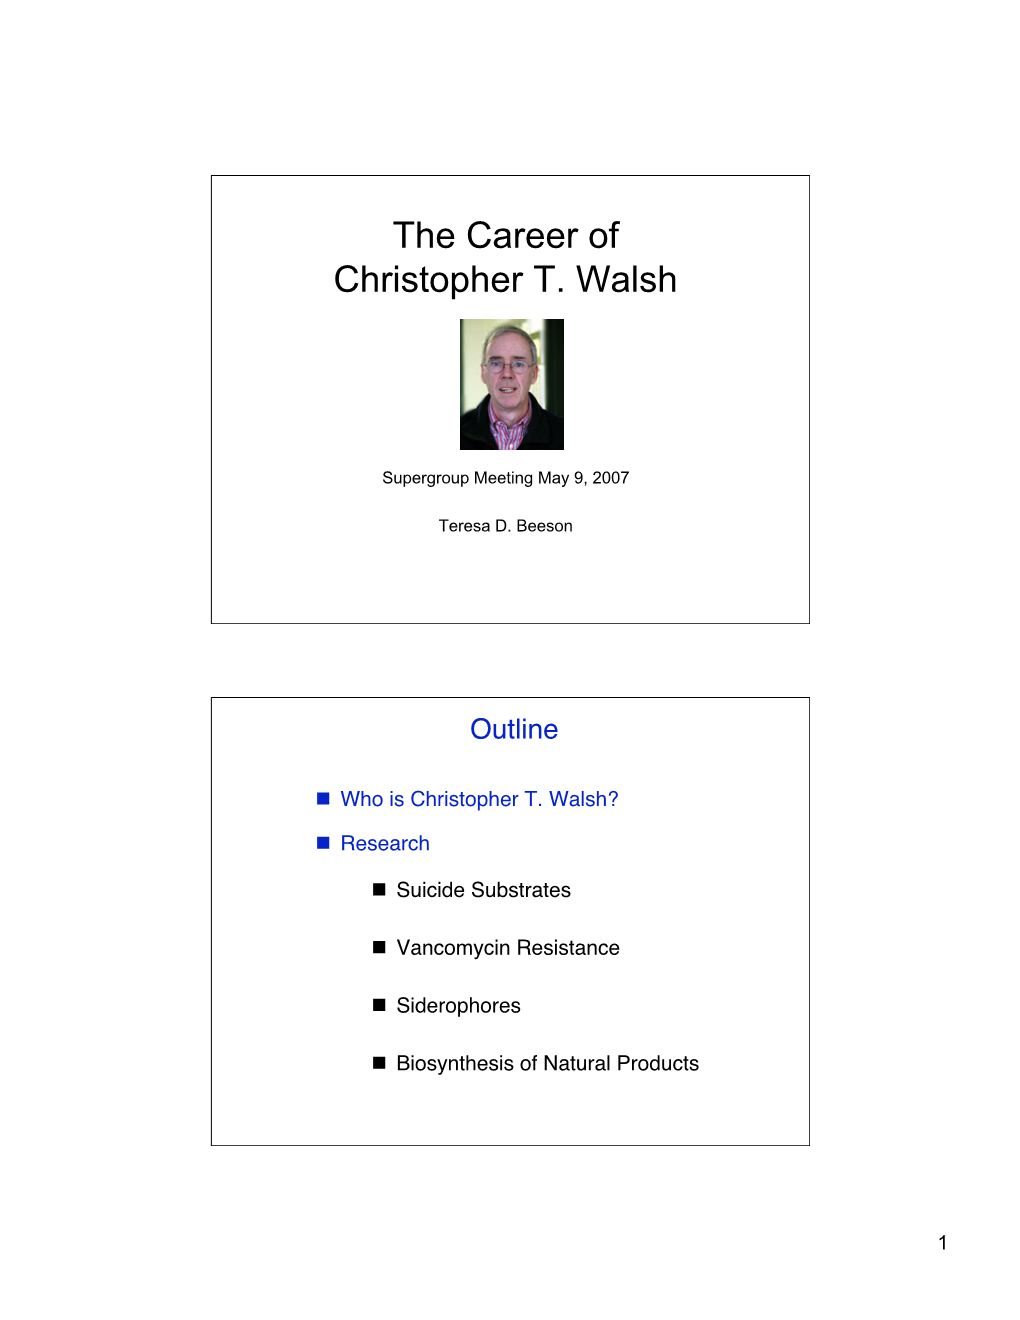 The Career of Christopher T. Walsh